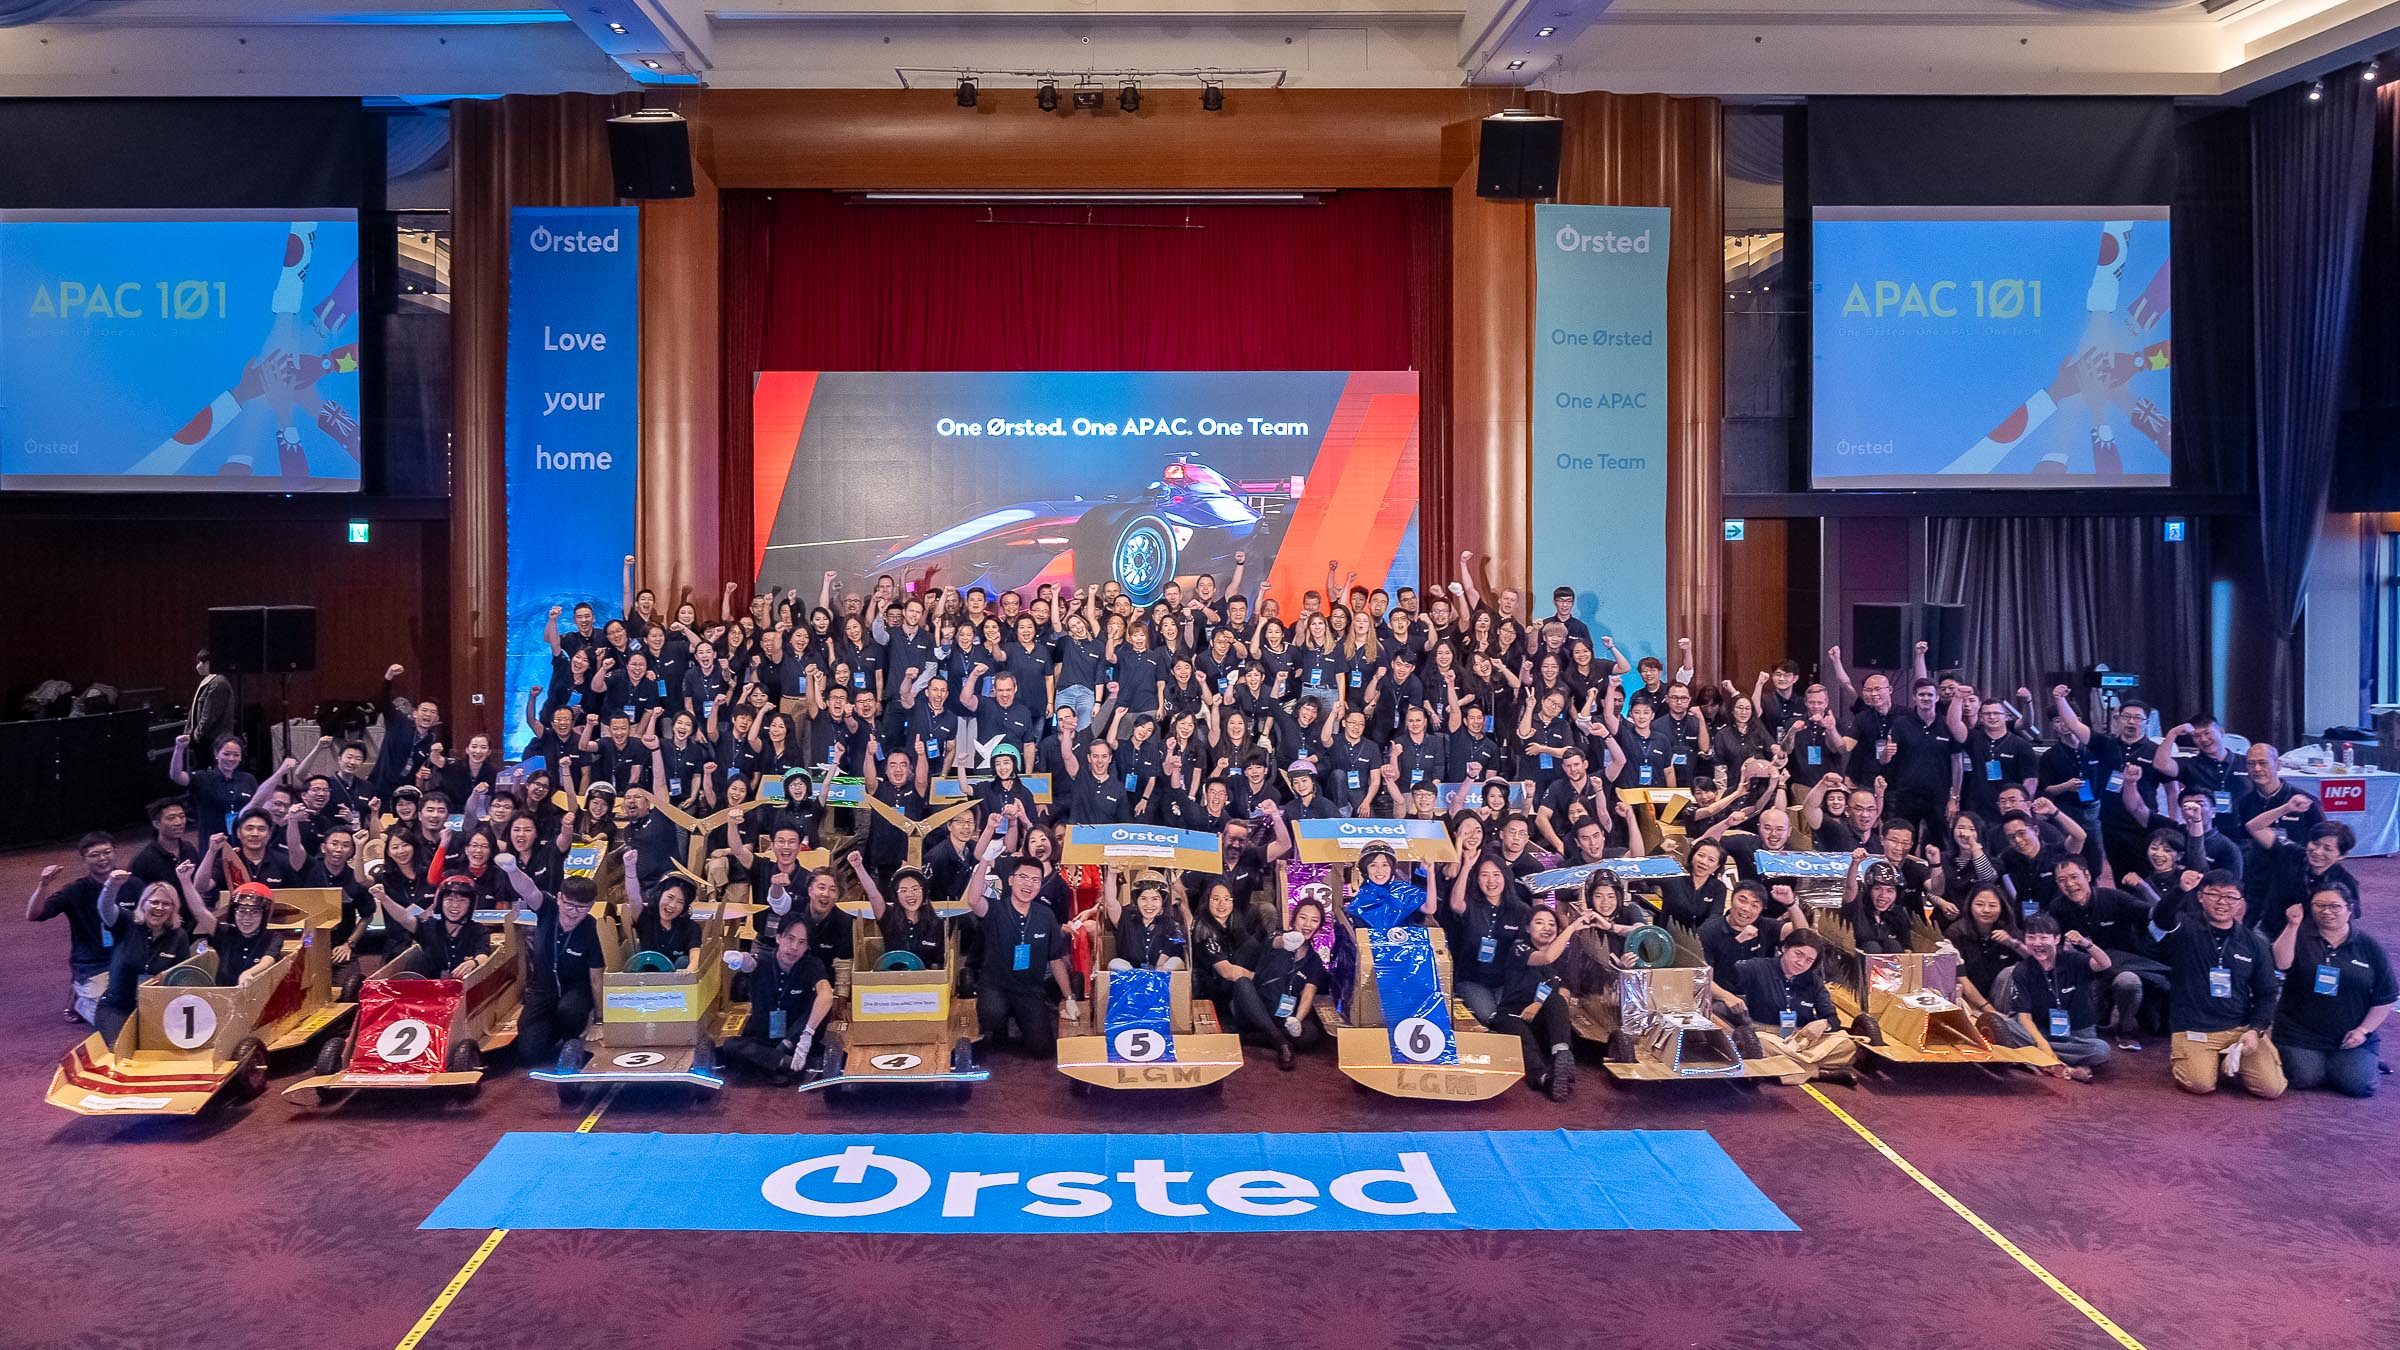 Ørsted Taiwan was awarded as “Best Companies to Work For” for three years in a row and the only energy company to win the ‘Diversity, Equity and Inclusion Award’.